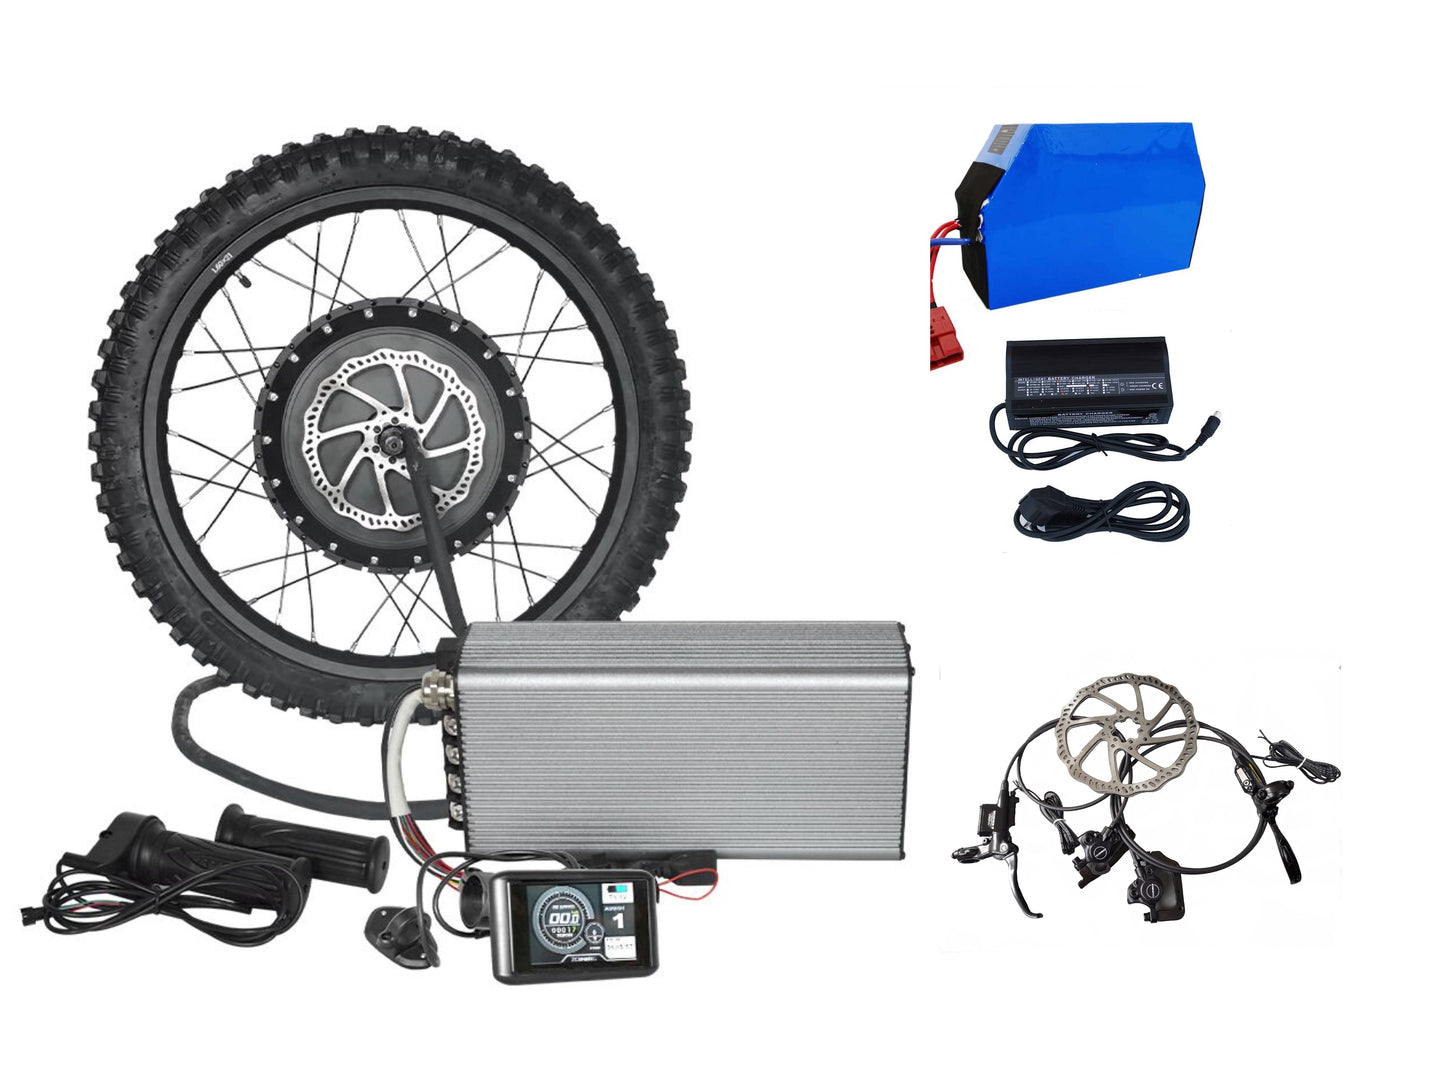 15000w stealth bomber ebike kit with battery